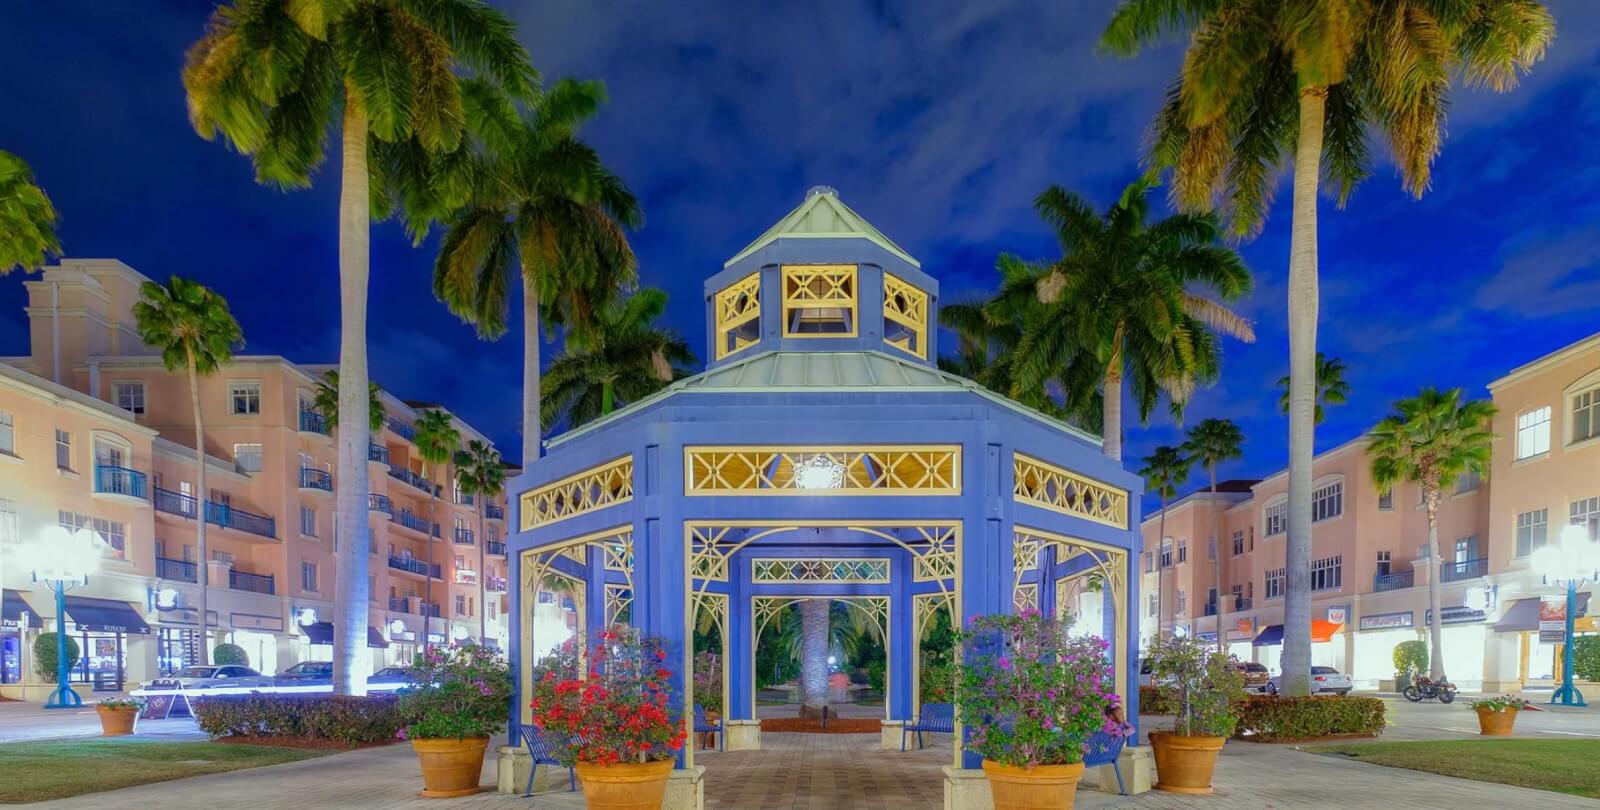 Boca Town Center - Great Locations